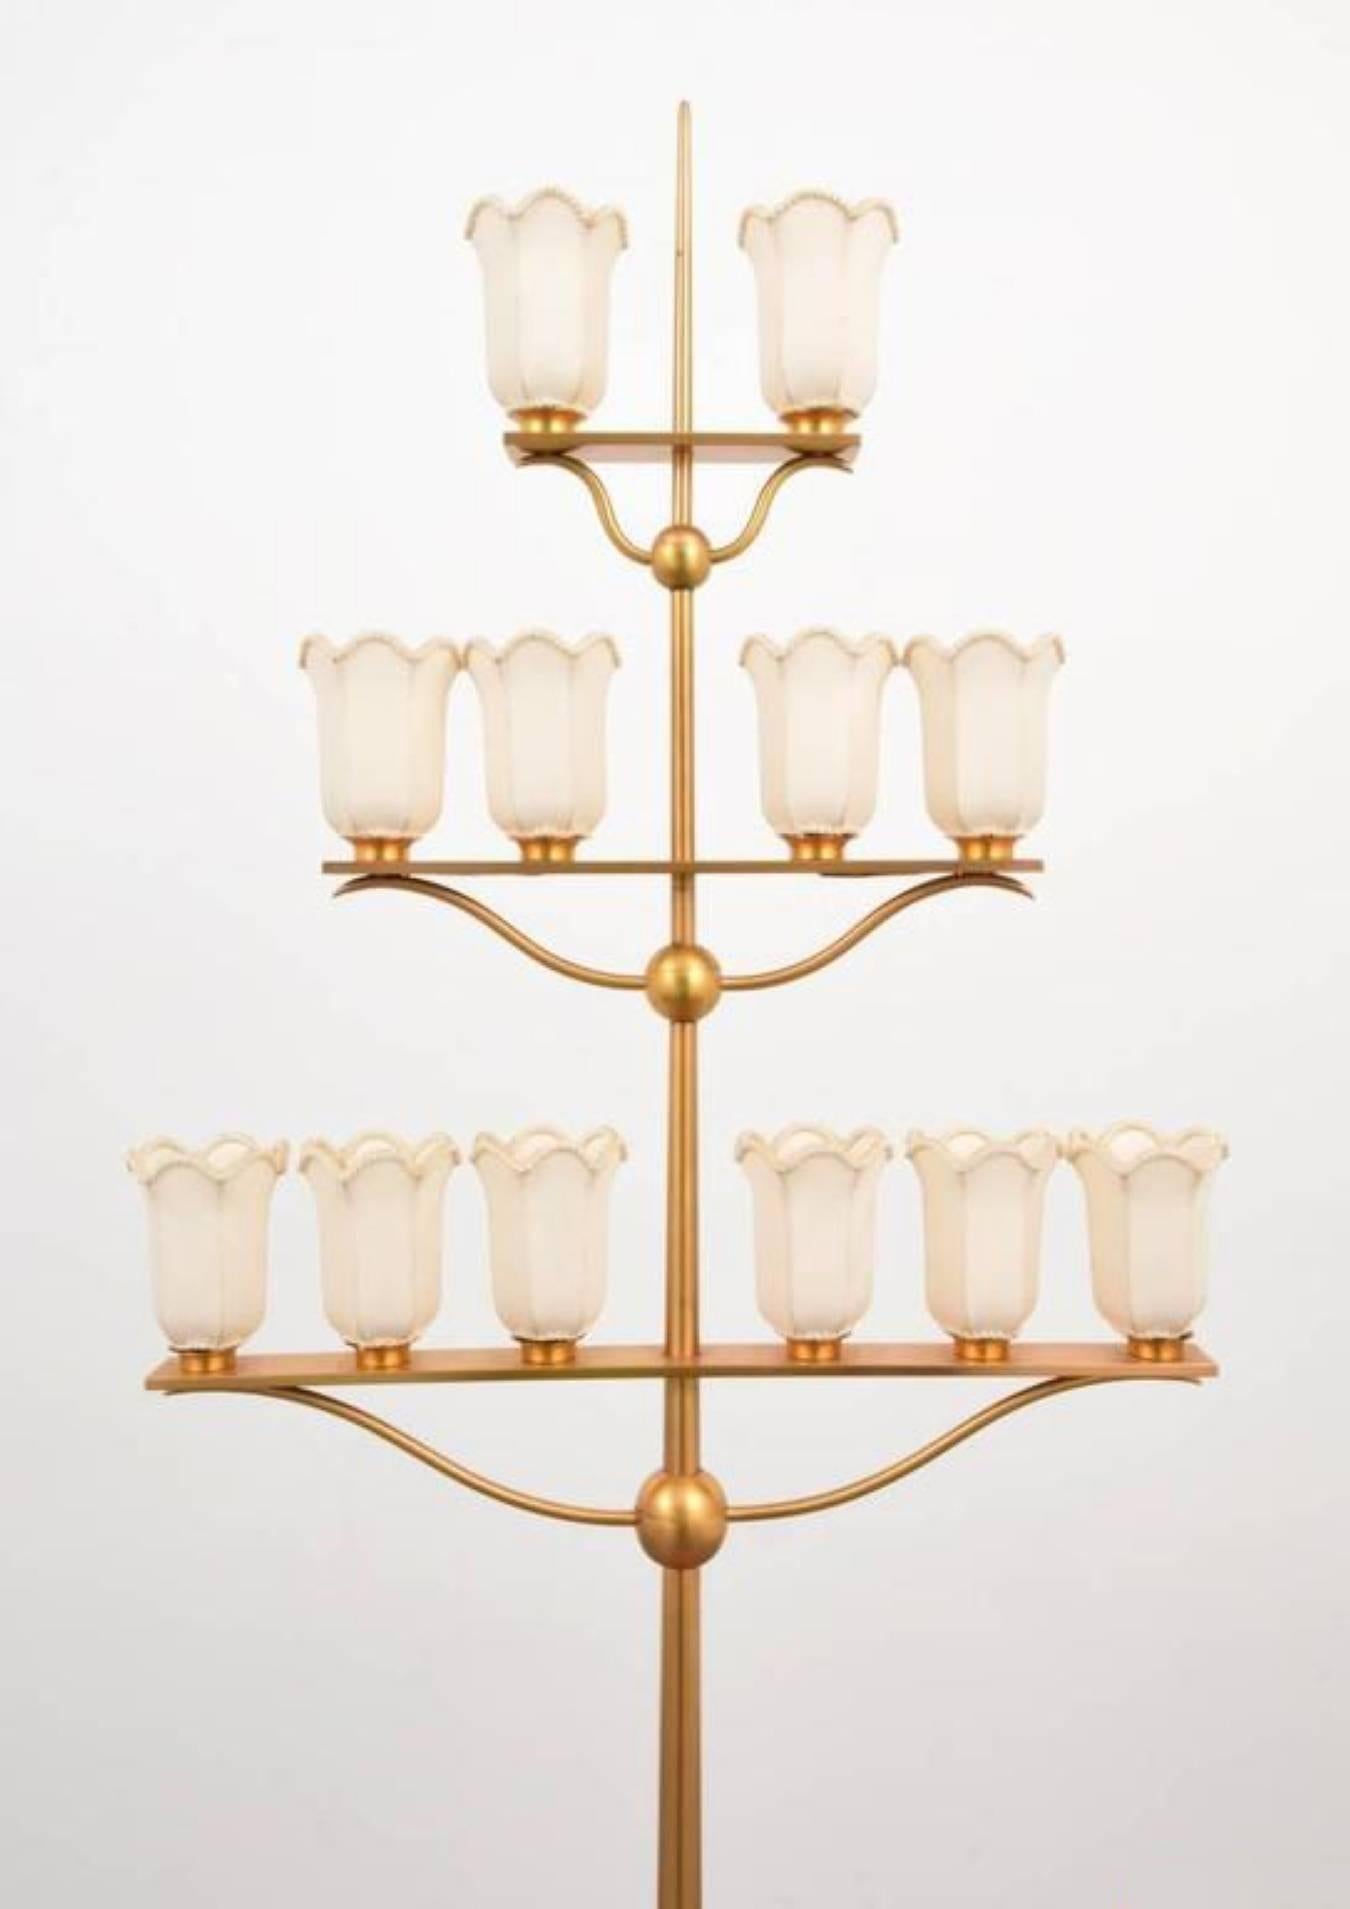 Monumental T.H. Robsjohn-Gibbings Floor Lamp, White Shadows Estate, 2 Available In Good Condition For Sale In West Palm Beach, FL